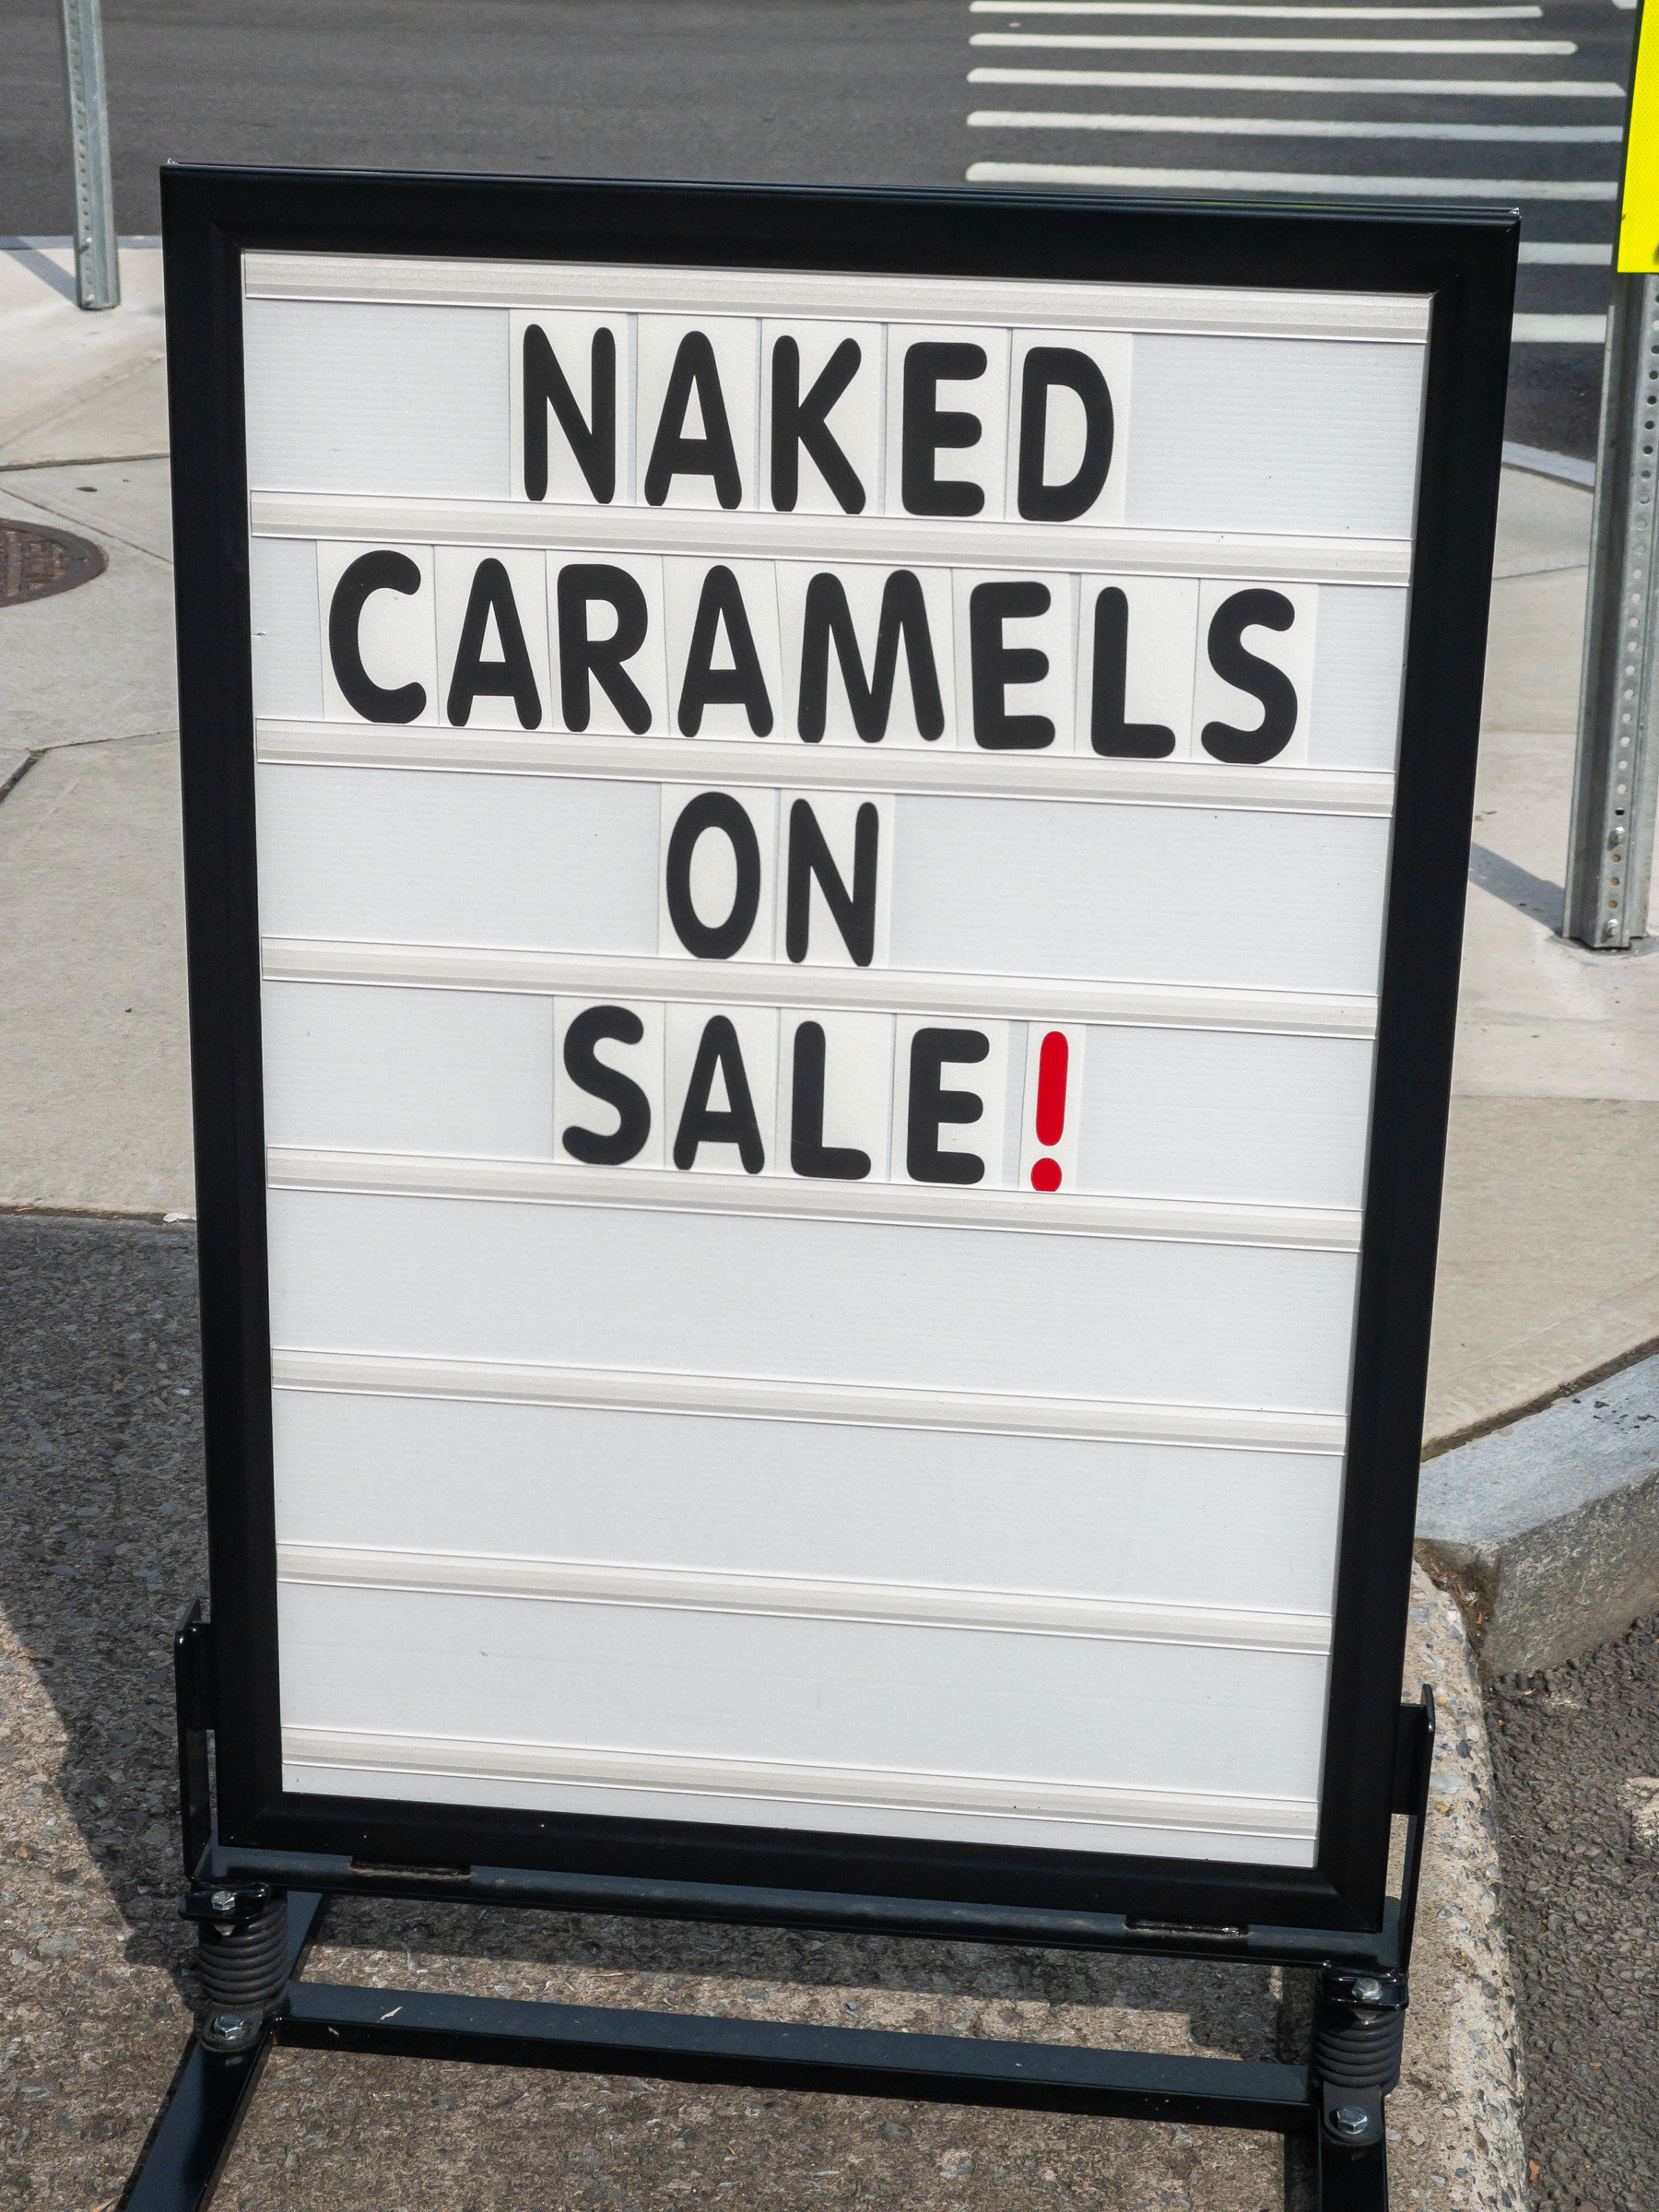 Sign on the sidewalk outside a shop with the words “NAKED CARAMELS ON SALE!”